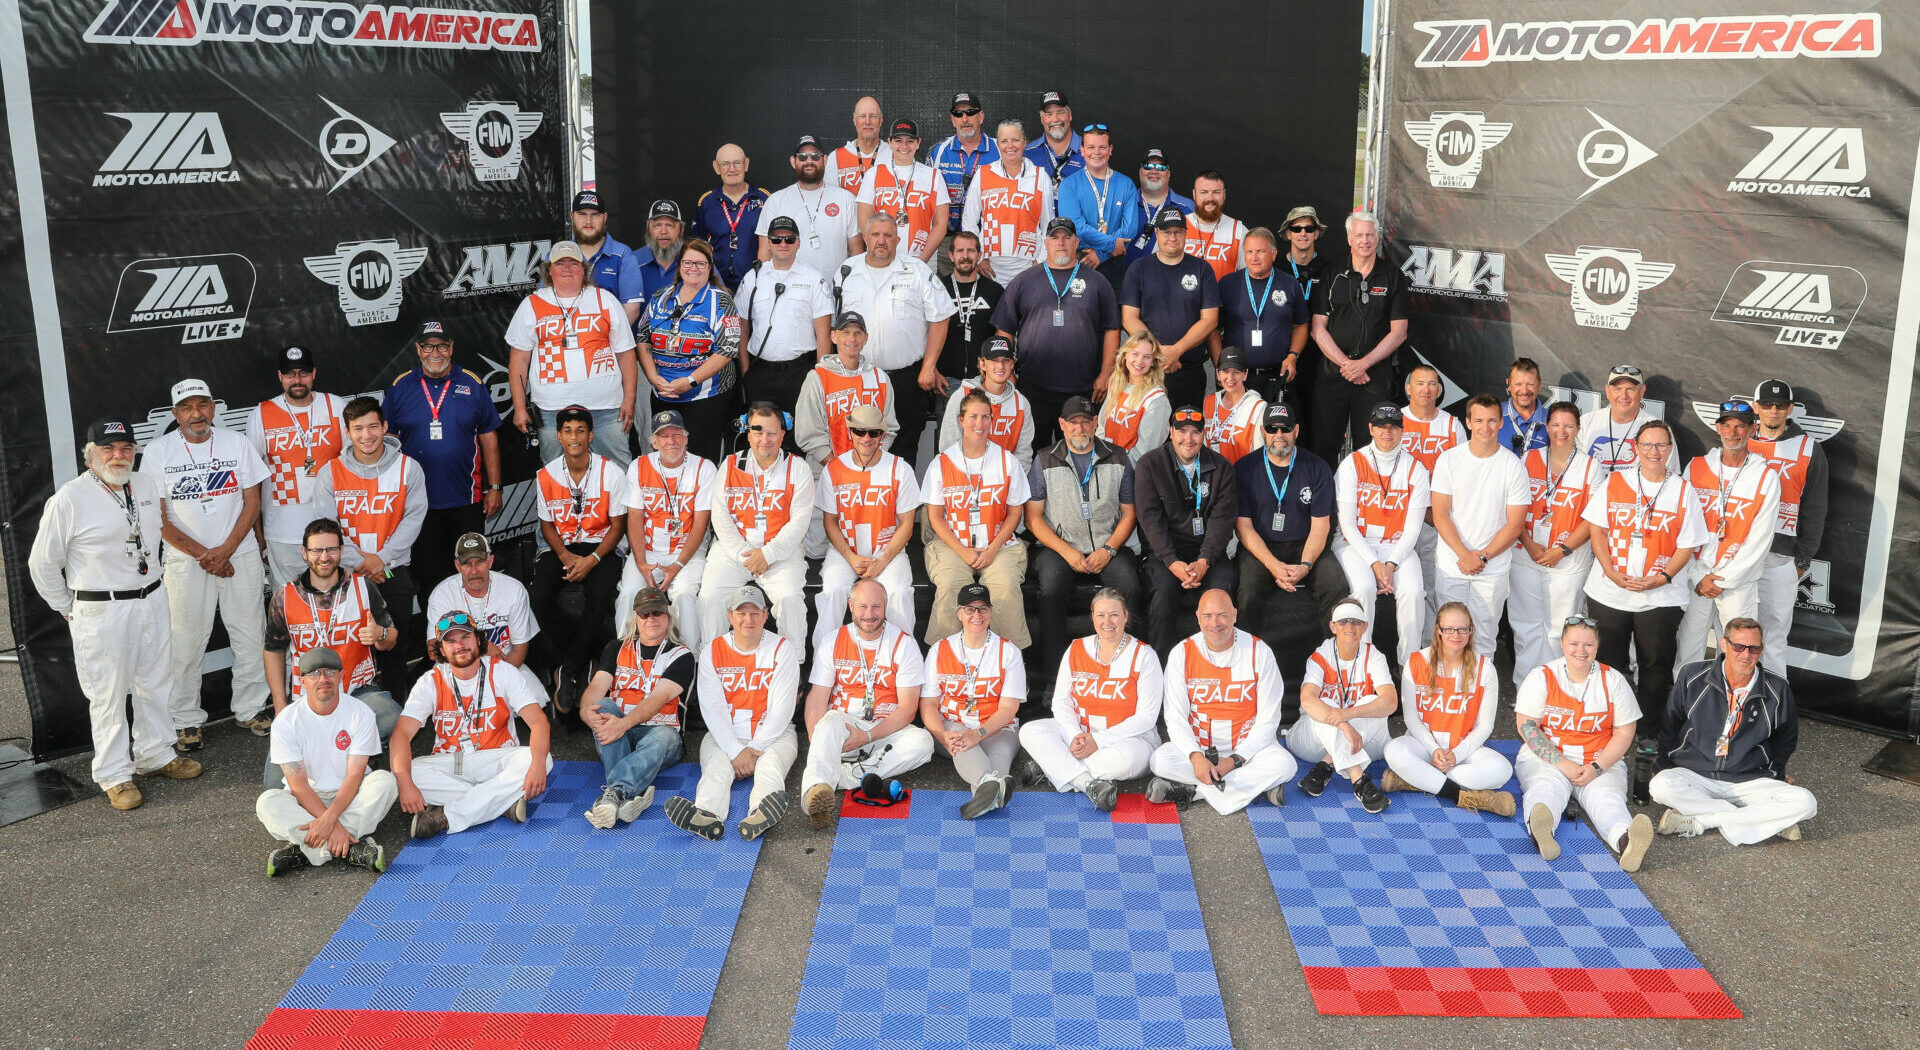 MotoAmerica track marshals and safety workers at Brainerd International Raceway. Photo by Brian J. Nelson.